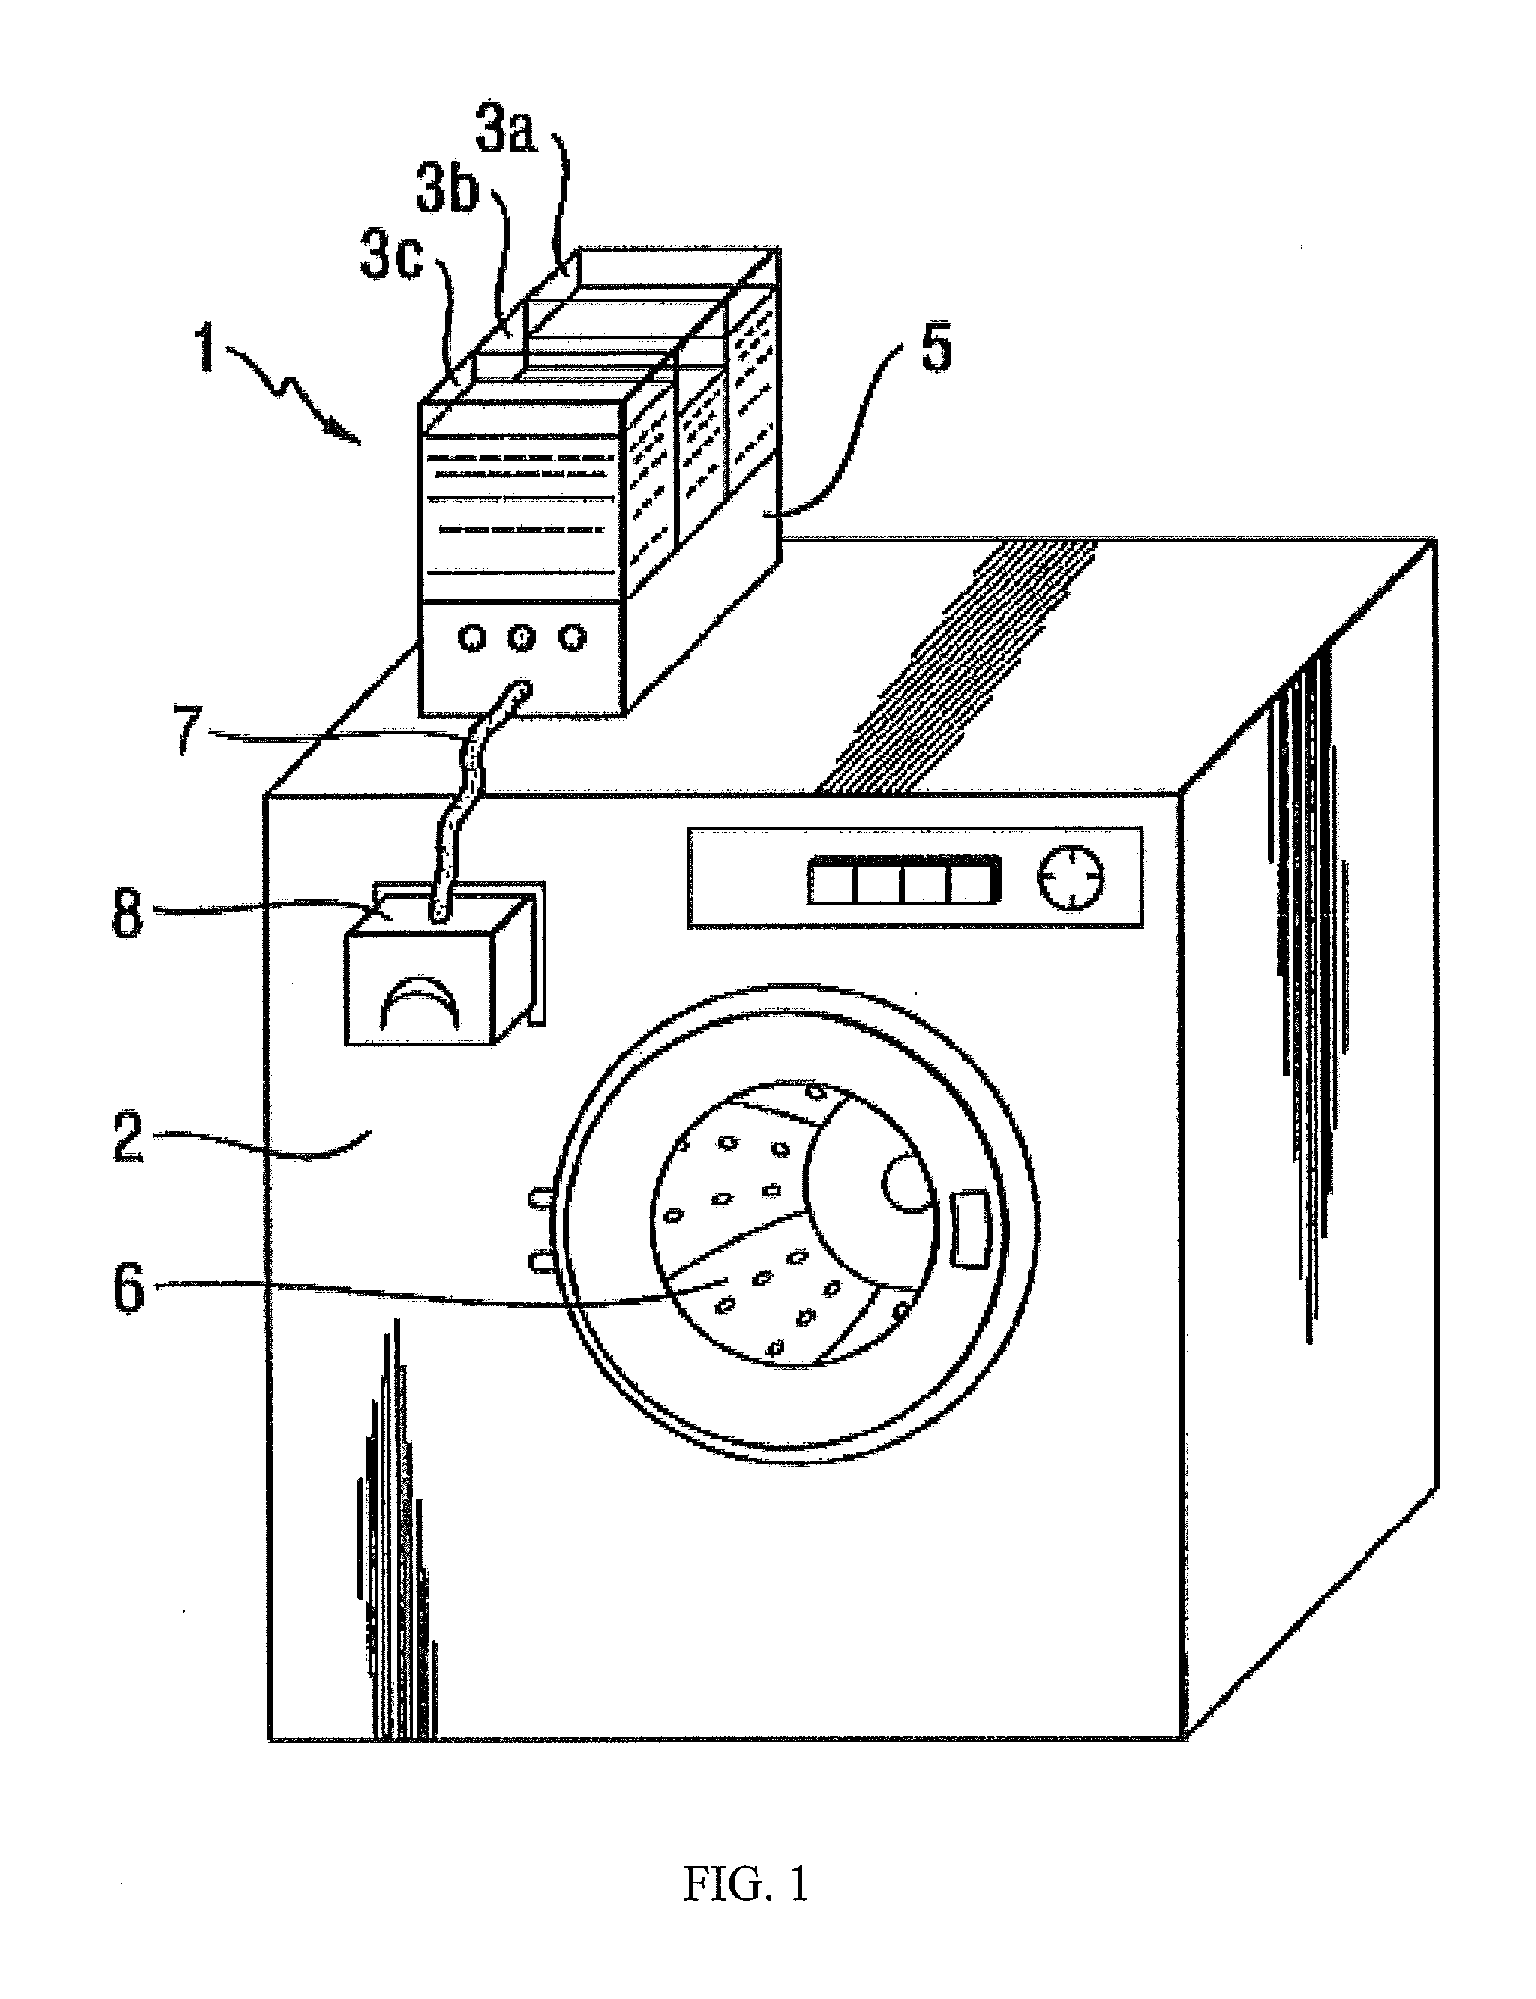 Metering system for use in conjunction with a water-conducting household appliance such as a washing machine, dishwasher, clothes dryer or the like